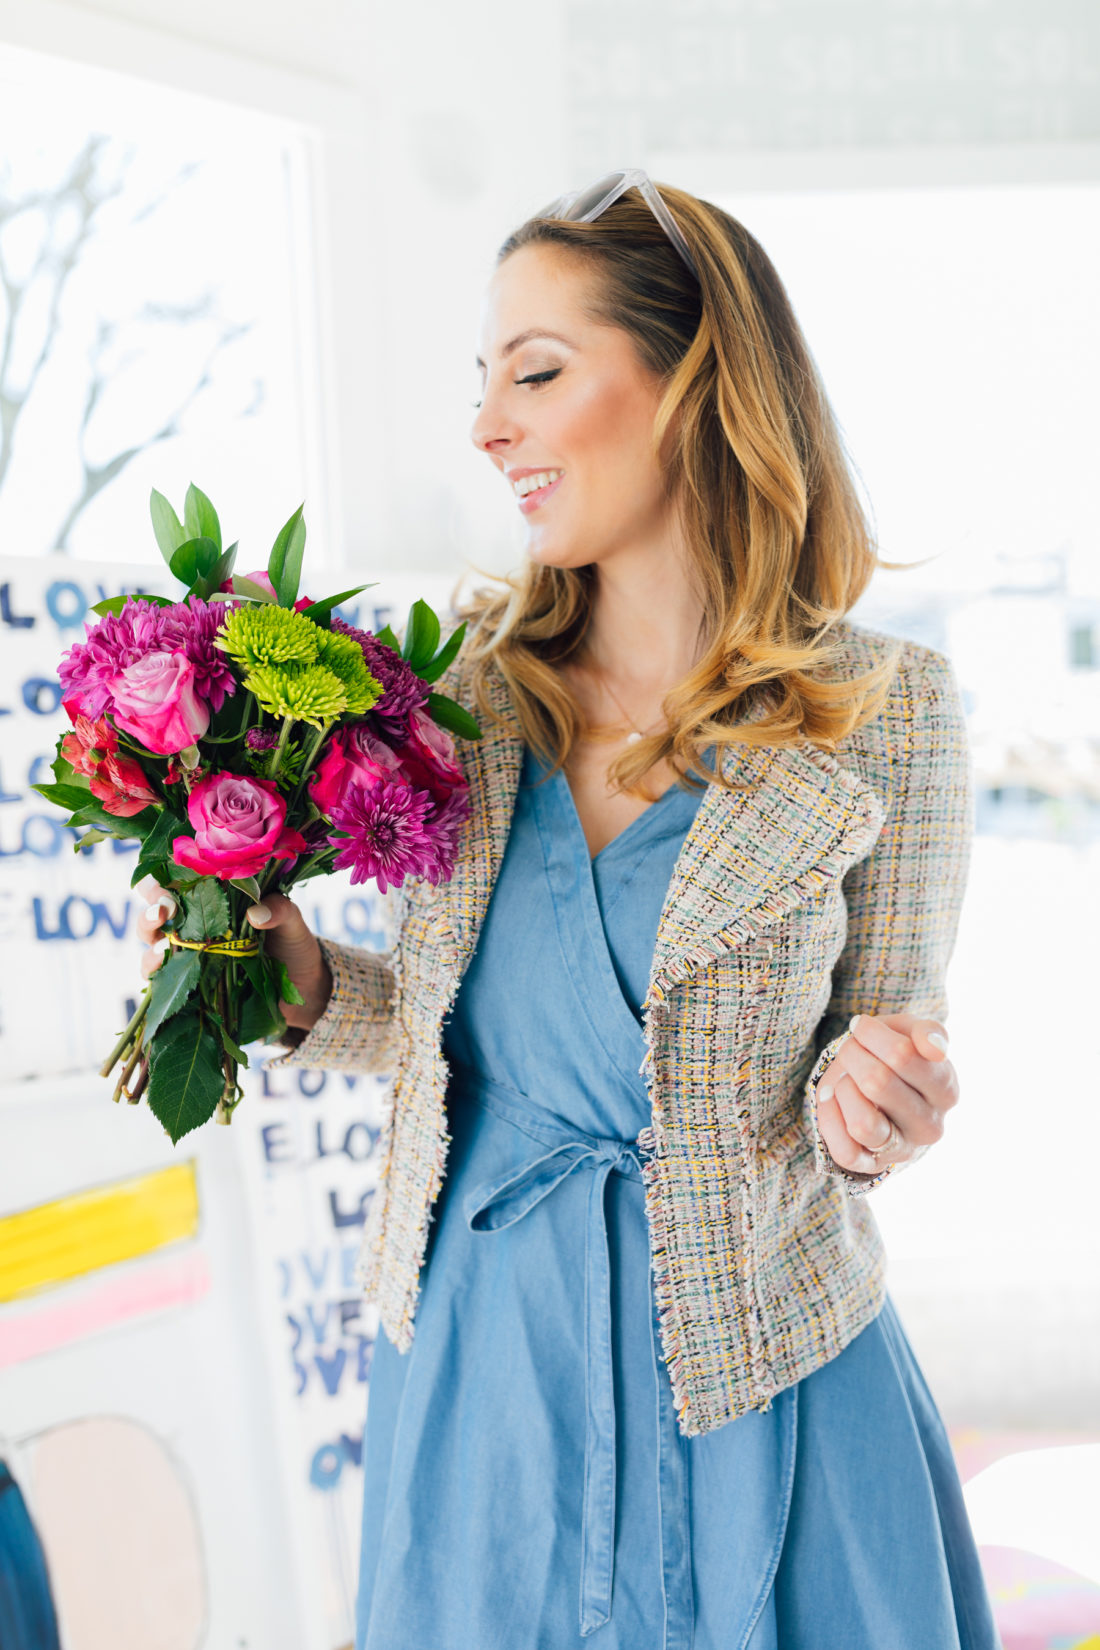 Eva Amurri Martino wears Ann Taylor Loft and shares her favorite Easter outfits